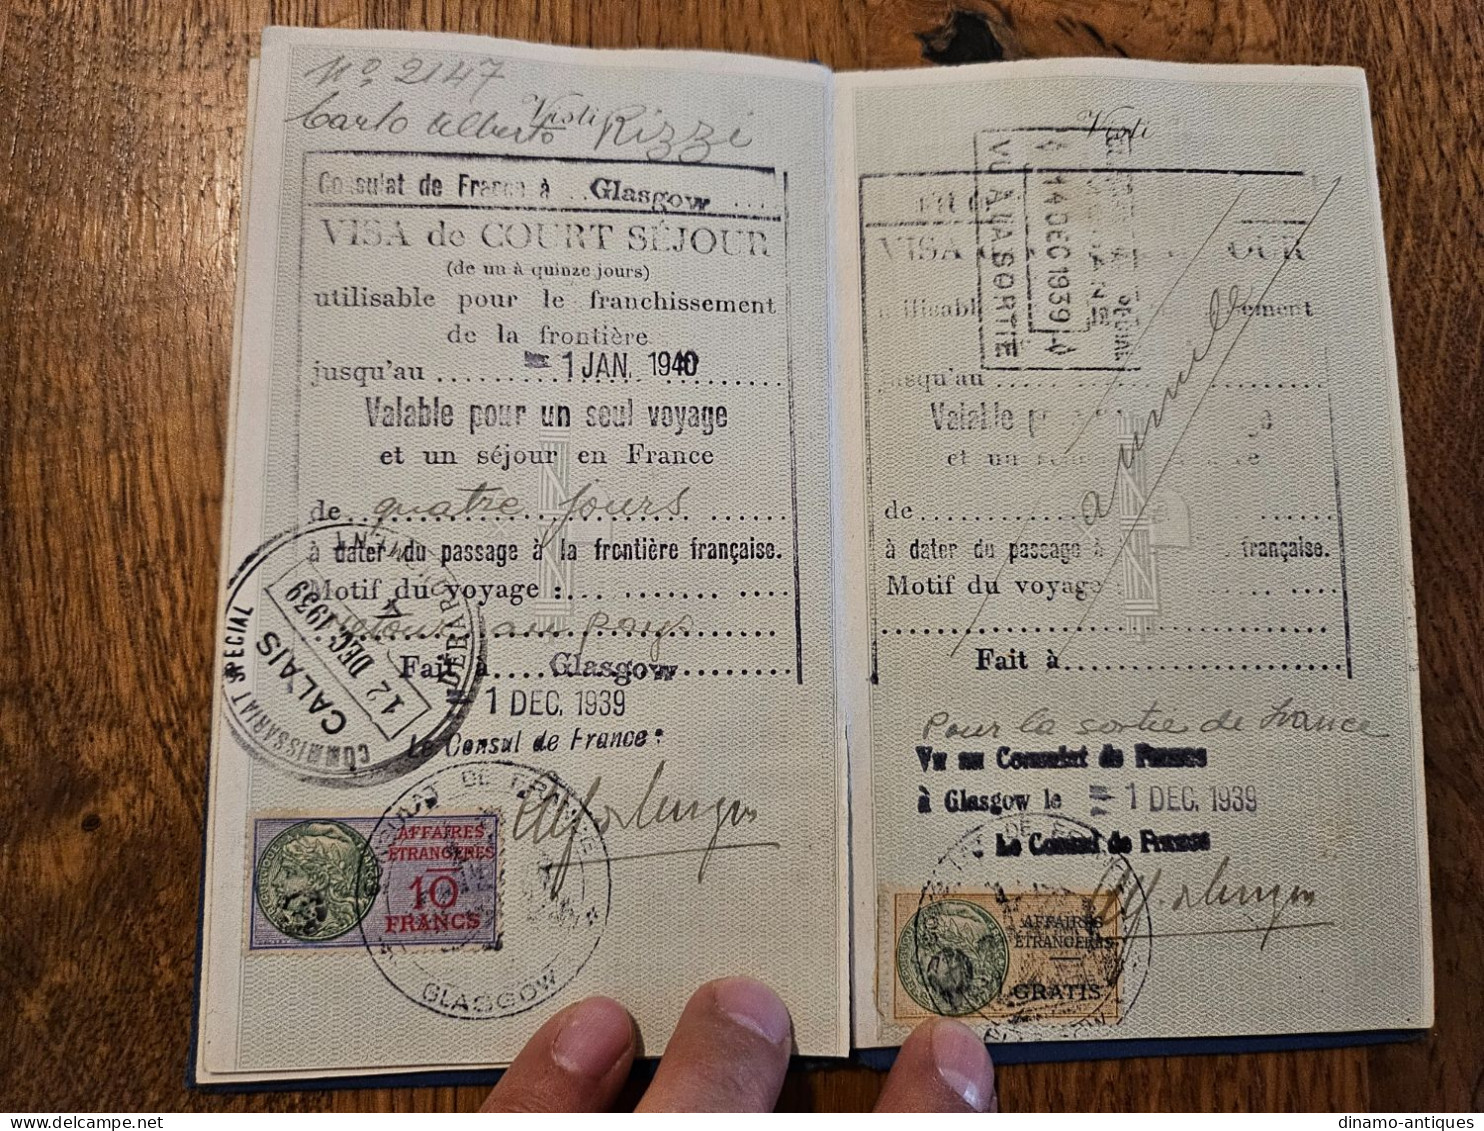 1939 Italy passport passeport issued in Rome - travel to France United Kingdom